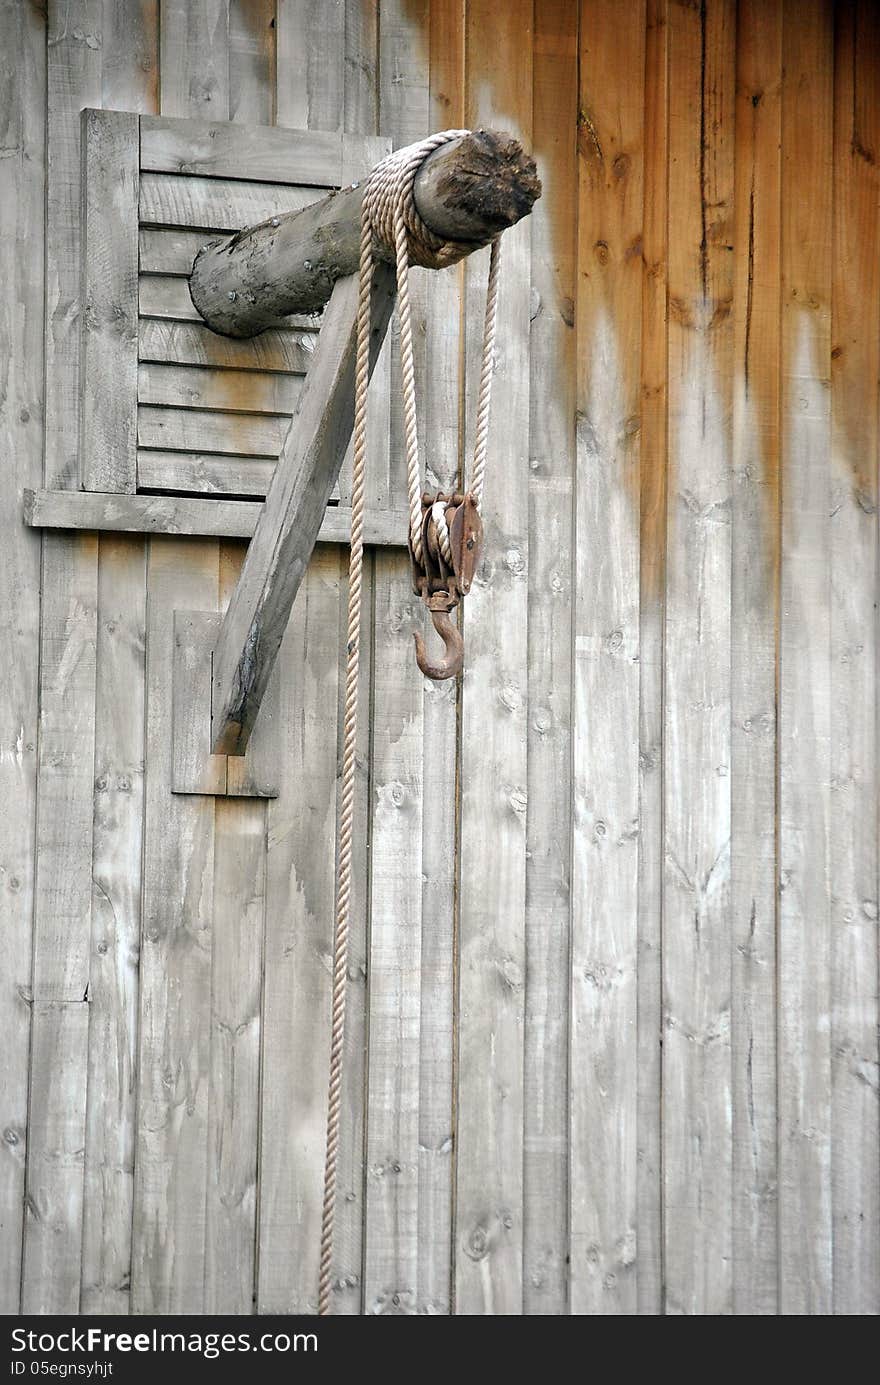 Horizontal pole through wooden wall with long rope rolled around it and iron hook attached to rope. Horizontal pole through wooden wall with long rope rolled around it and iron hook attached to rope